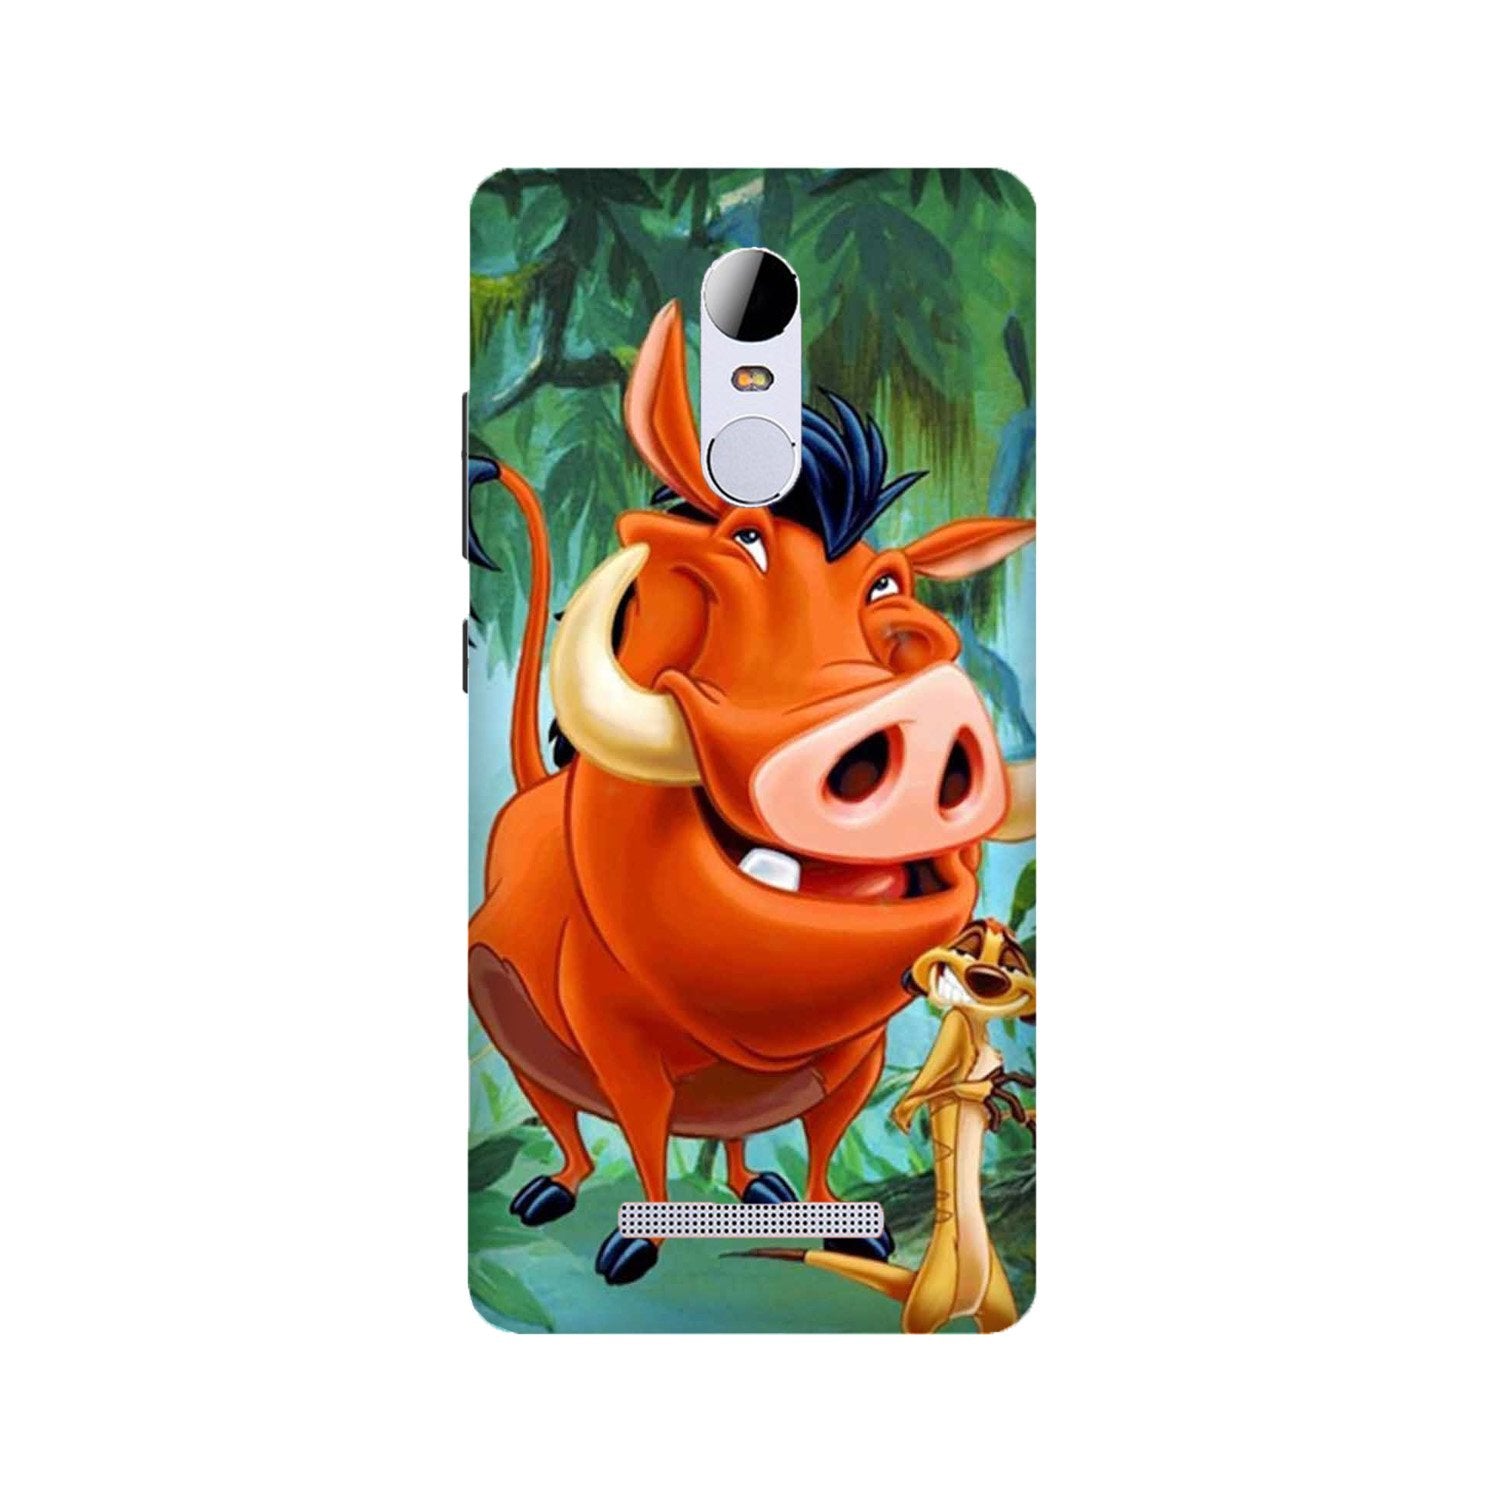 Timon and Pumbaa Mobile Back Case for Redmi Note 3(Design - 305)